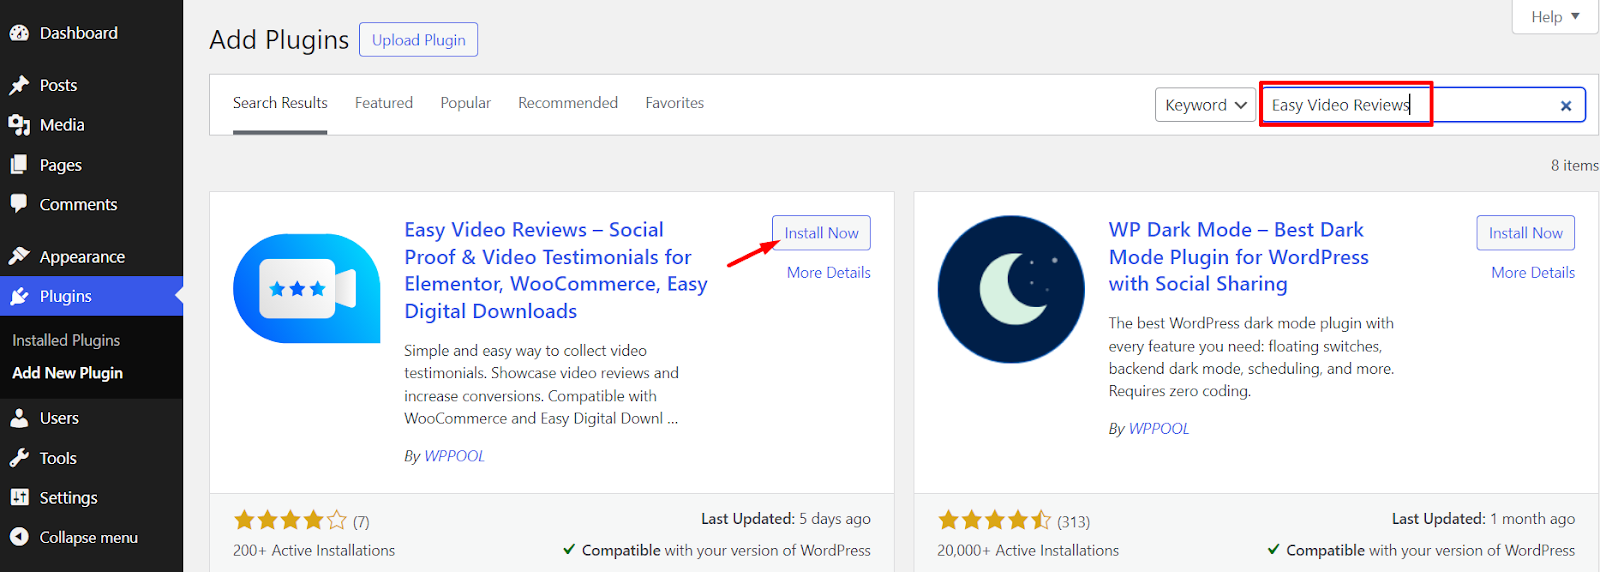 How to get started with Easy Video Reviews (Onboarding steps)